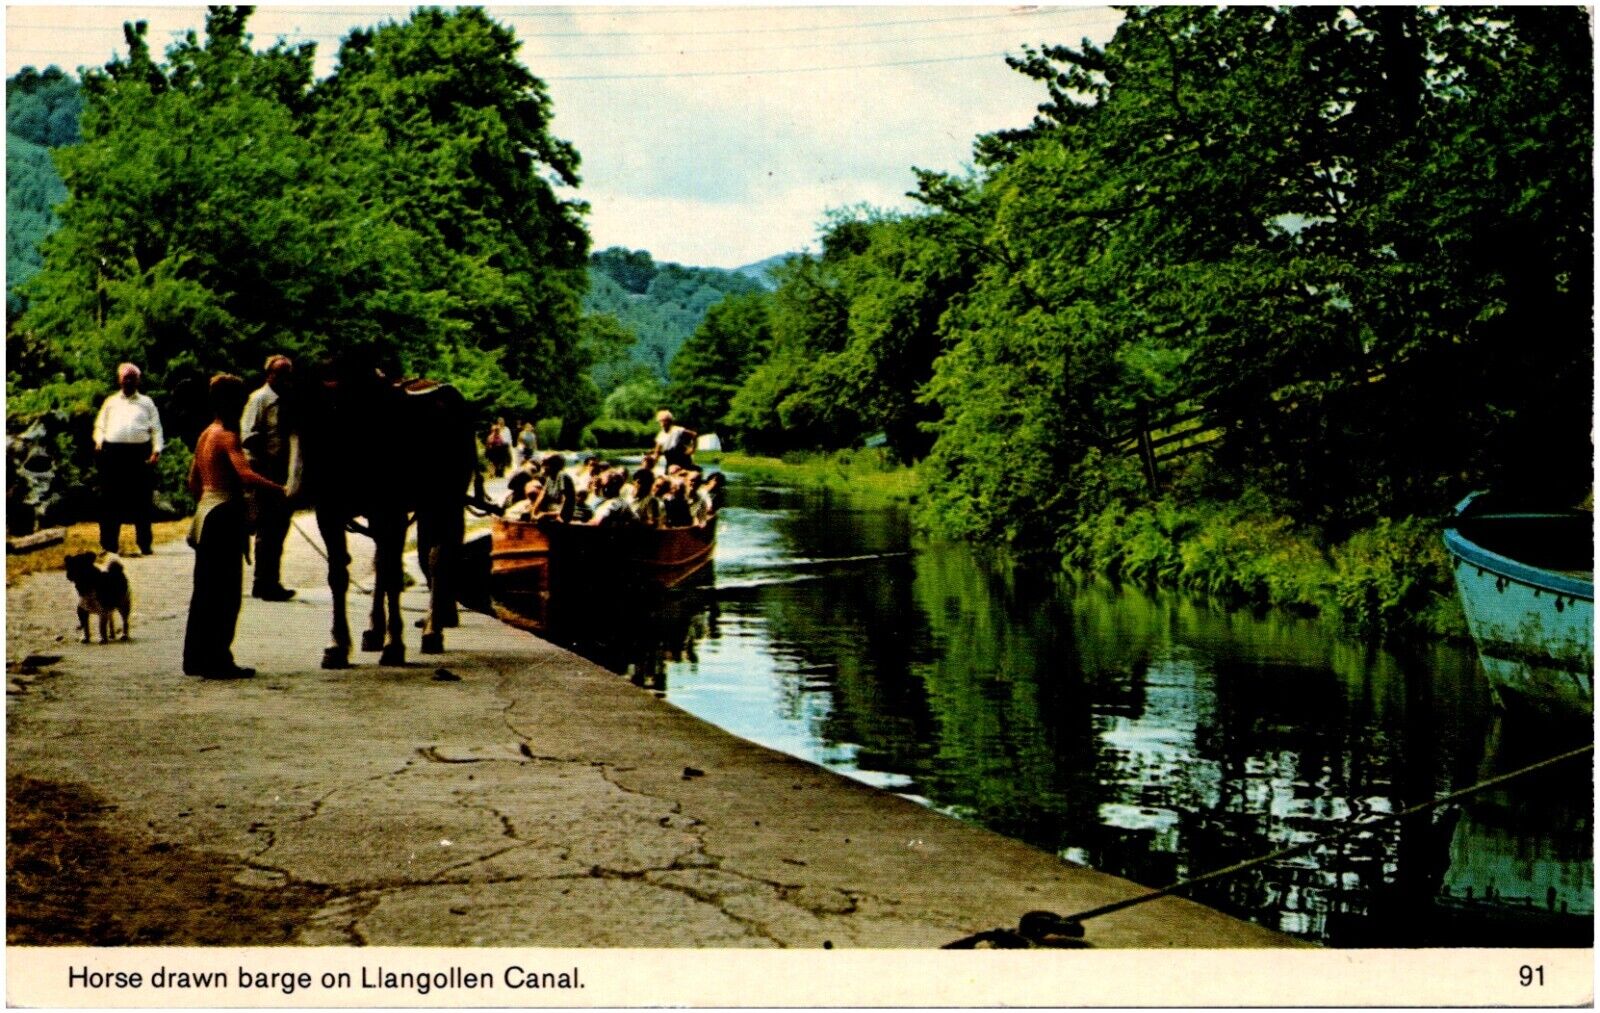 Horse Drawn Barge on Llangollen Canal England & Wales 1950s Chrome Postcard